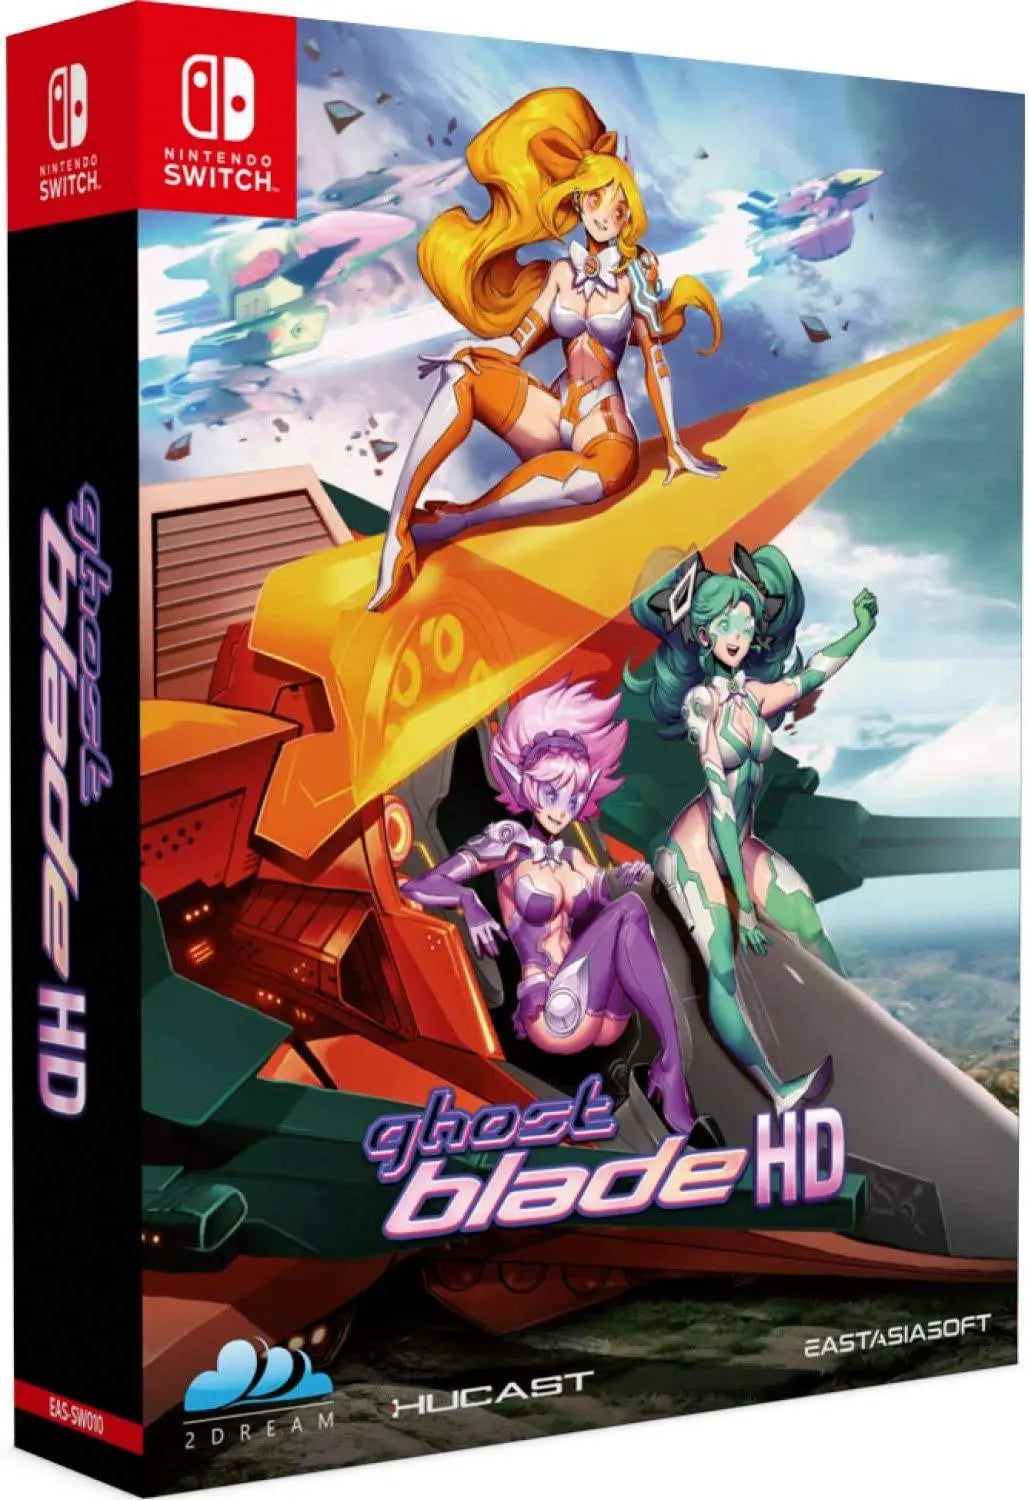 GHOST BLADE HD [LIMITED EDITION] Nintendo Switch King Gaming